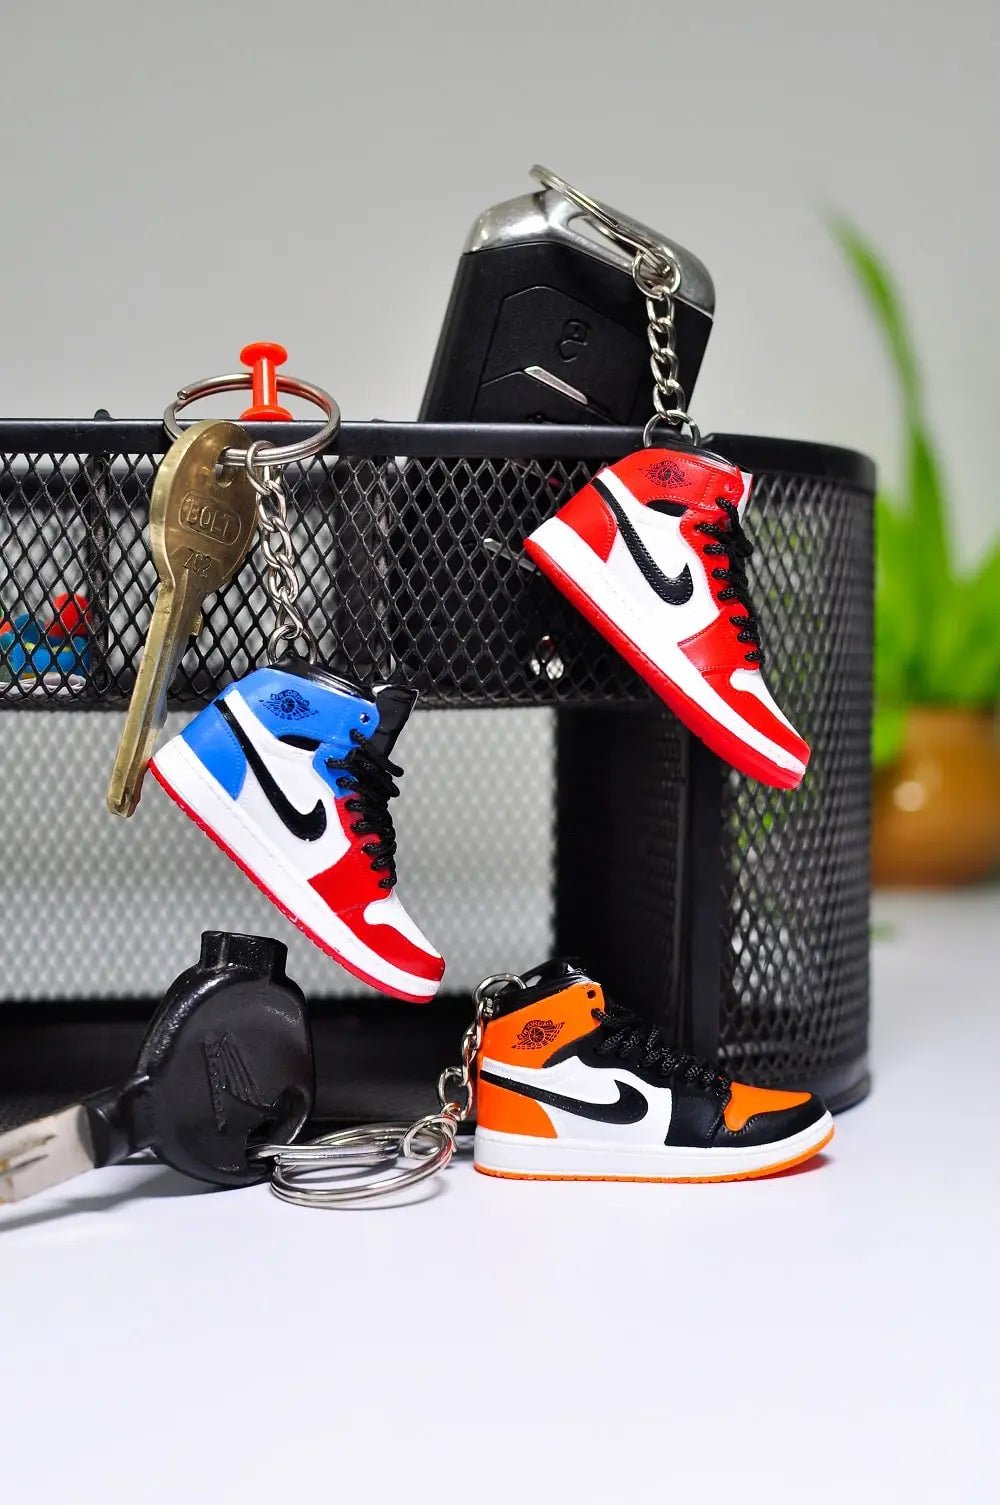 Jordan 4 Mini Shoe Keychain Single or Pair With or Without The Box